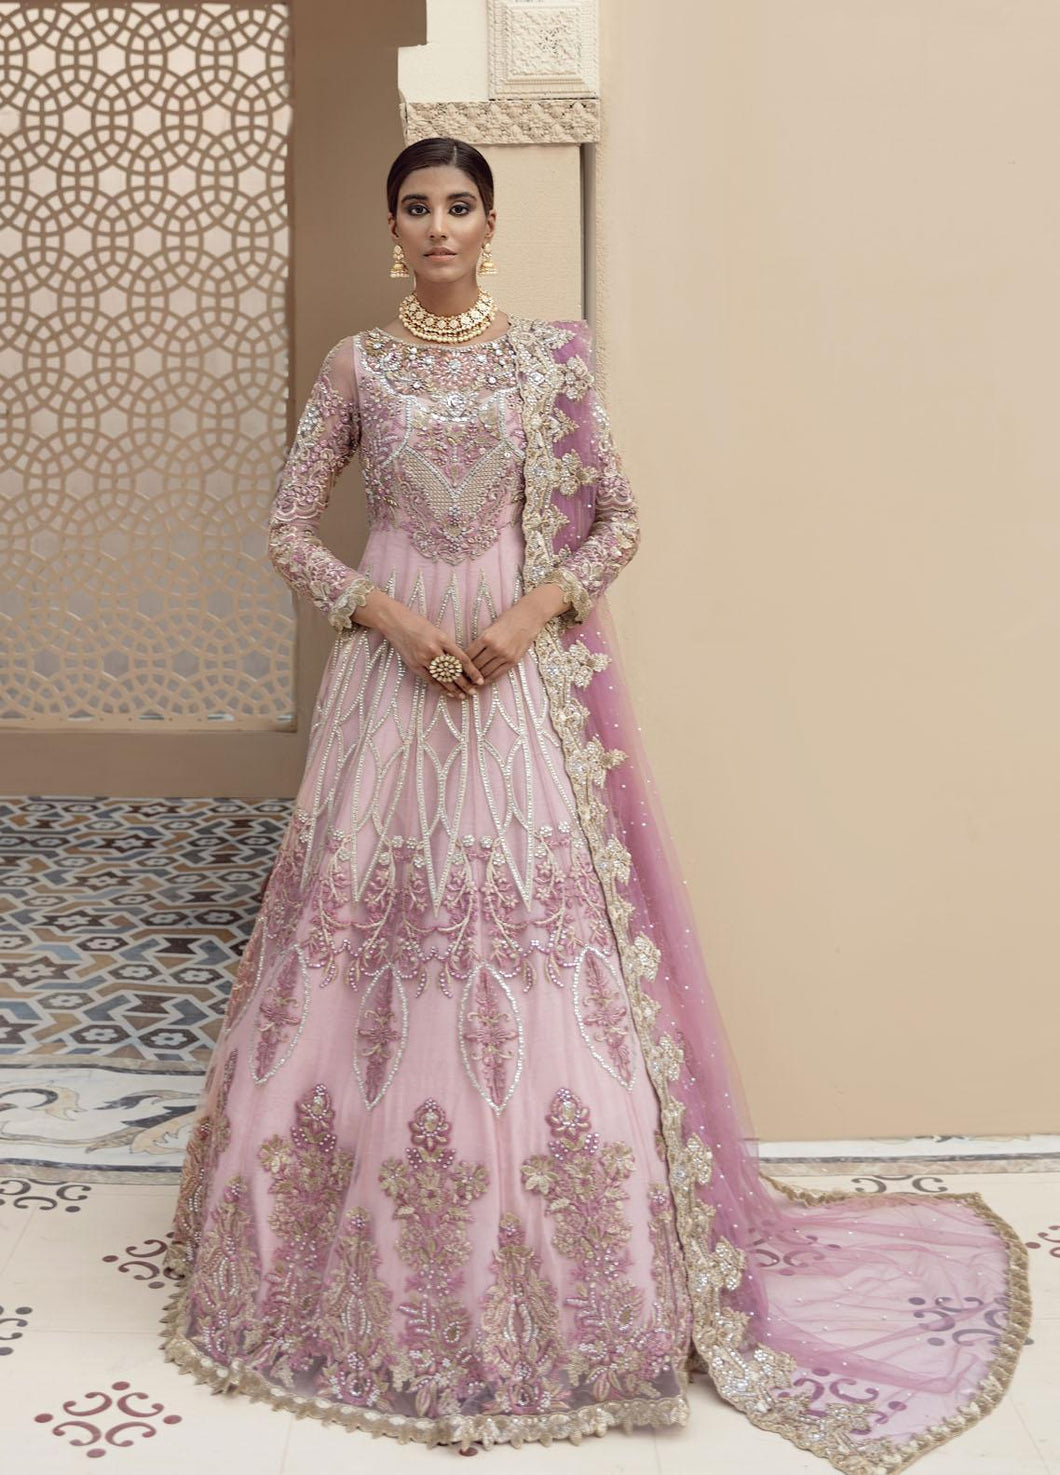 IMROZIA | BRIDAL COLLECTION 2021 | IB-13 ELYSIAN Lavender Dress @lebaasonline. The Pakistani designer brands such as Imrozia, Maria b are in great demand. The Pakistani designer dresses online UK, USA can be bought at your doorstep. Pakistani bridal dresses online USA are extremely trending now at SALE!